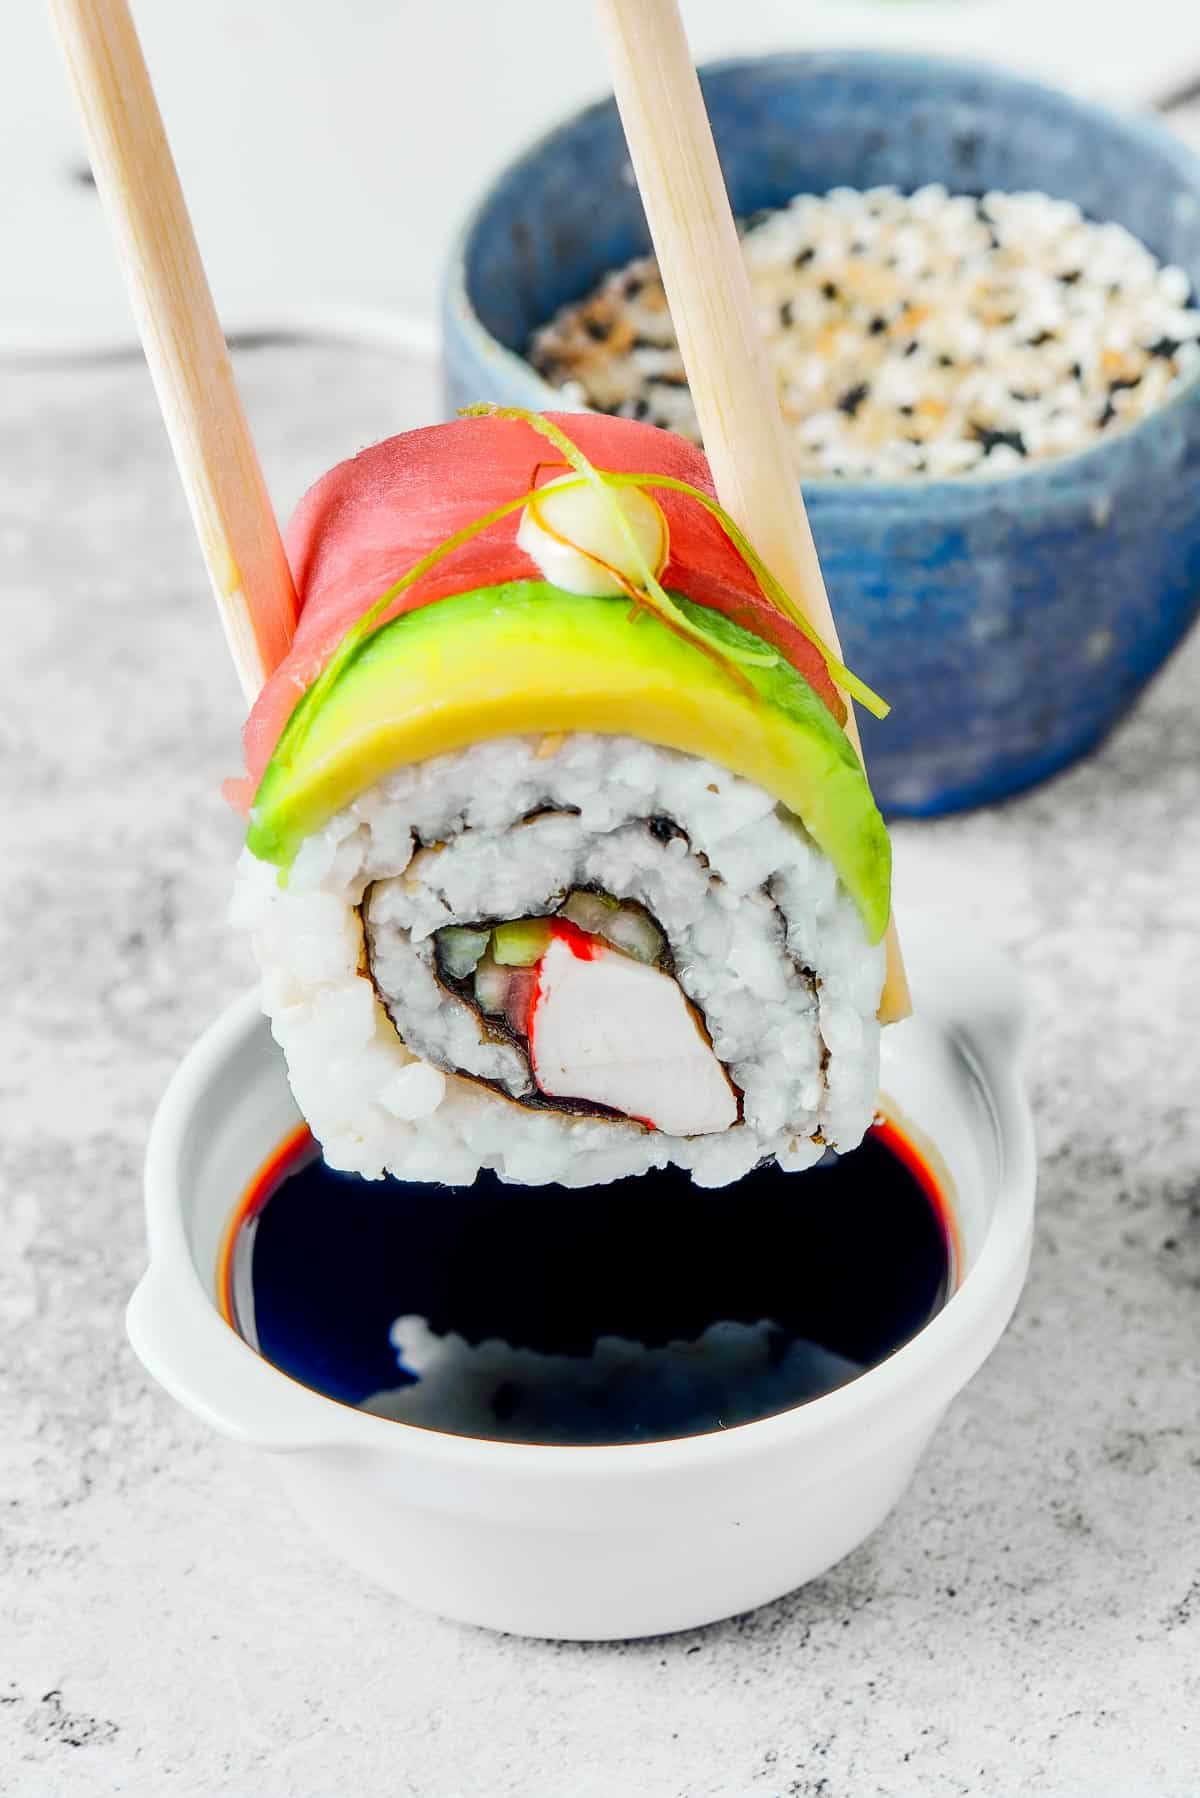 A bite of sushi held in a pair of chopsticks. A small plate of sushi and a container of soy sauce is in the background.